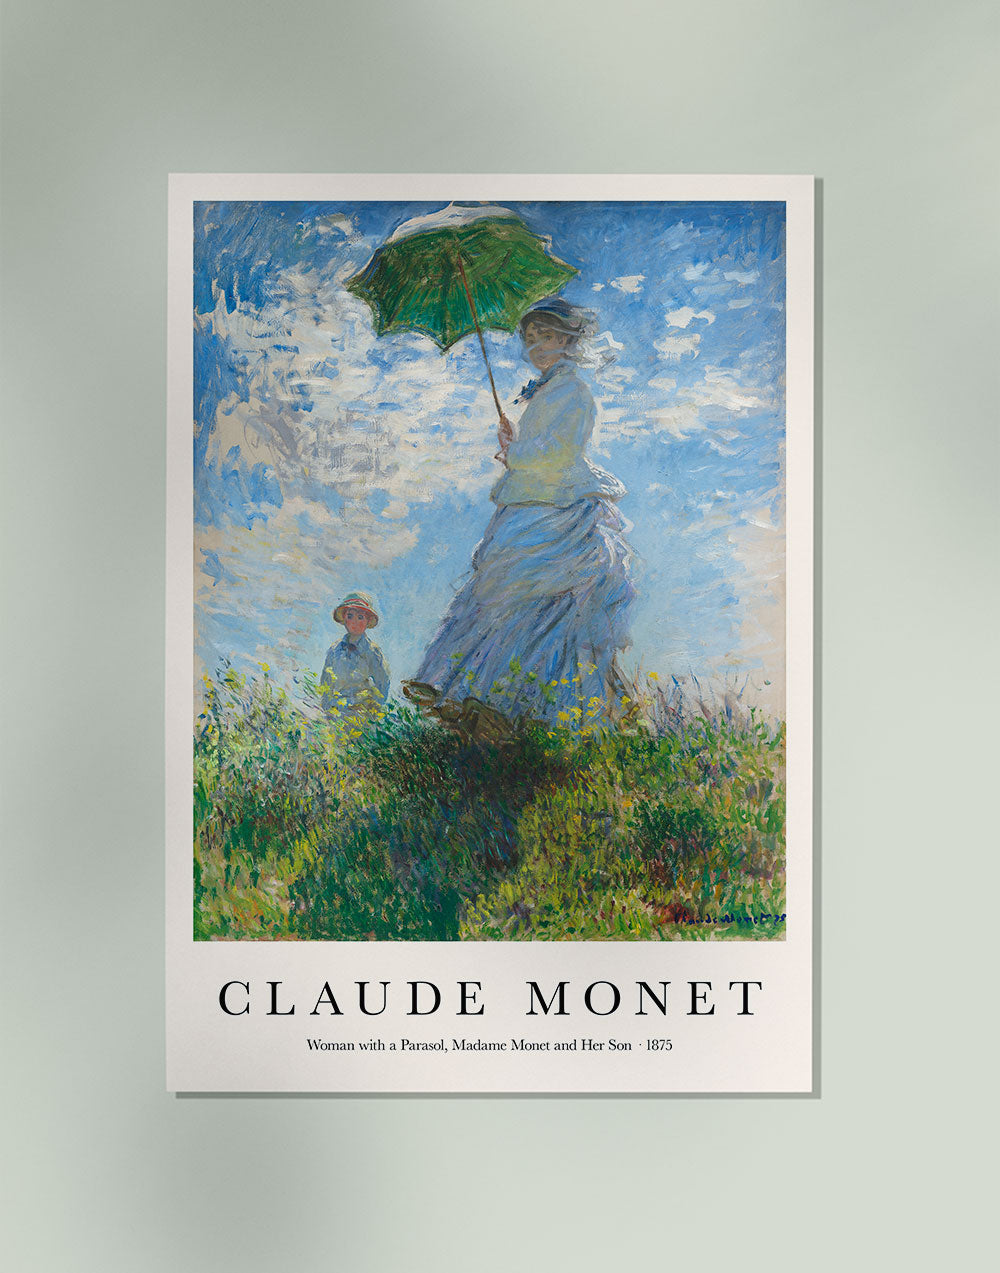 Woman with a Parousel, Madame Monet and her Son by Claude Monet Art Exhibition Poster